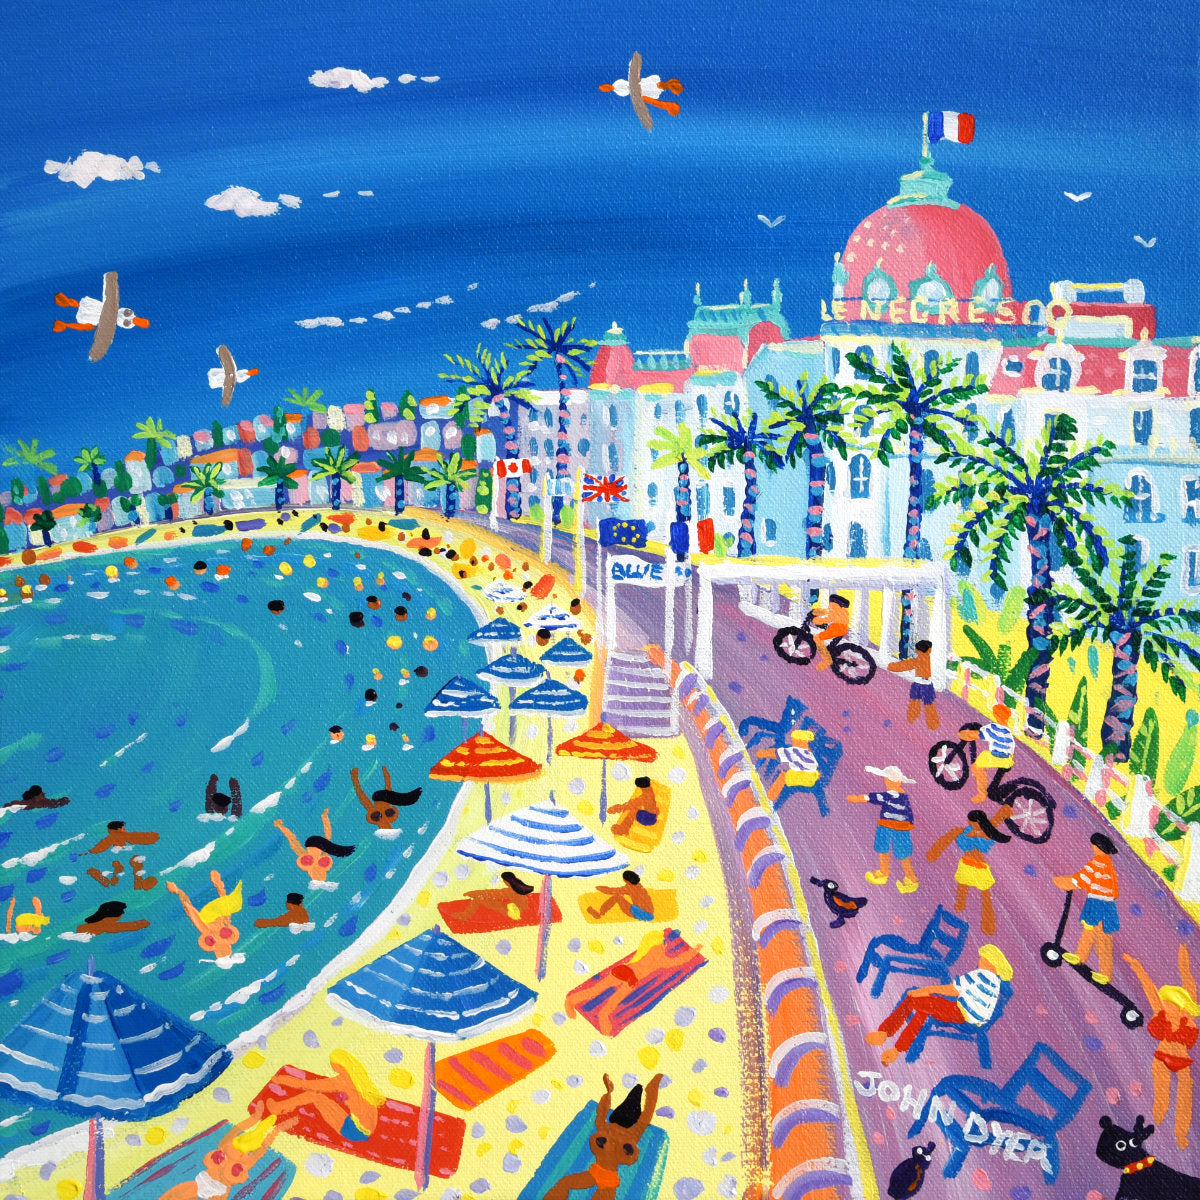 &#39;Summer Fun on the Beach, Le Negresco, Nice&#39;, 12x12 inches acrylic on canvas. Paintings of Monaco by British Artist John Dyer. French Art Gallery